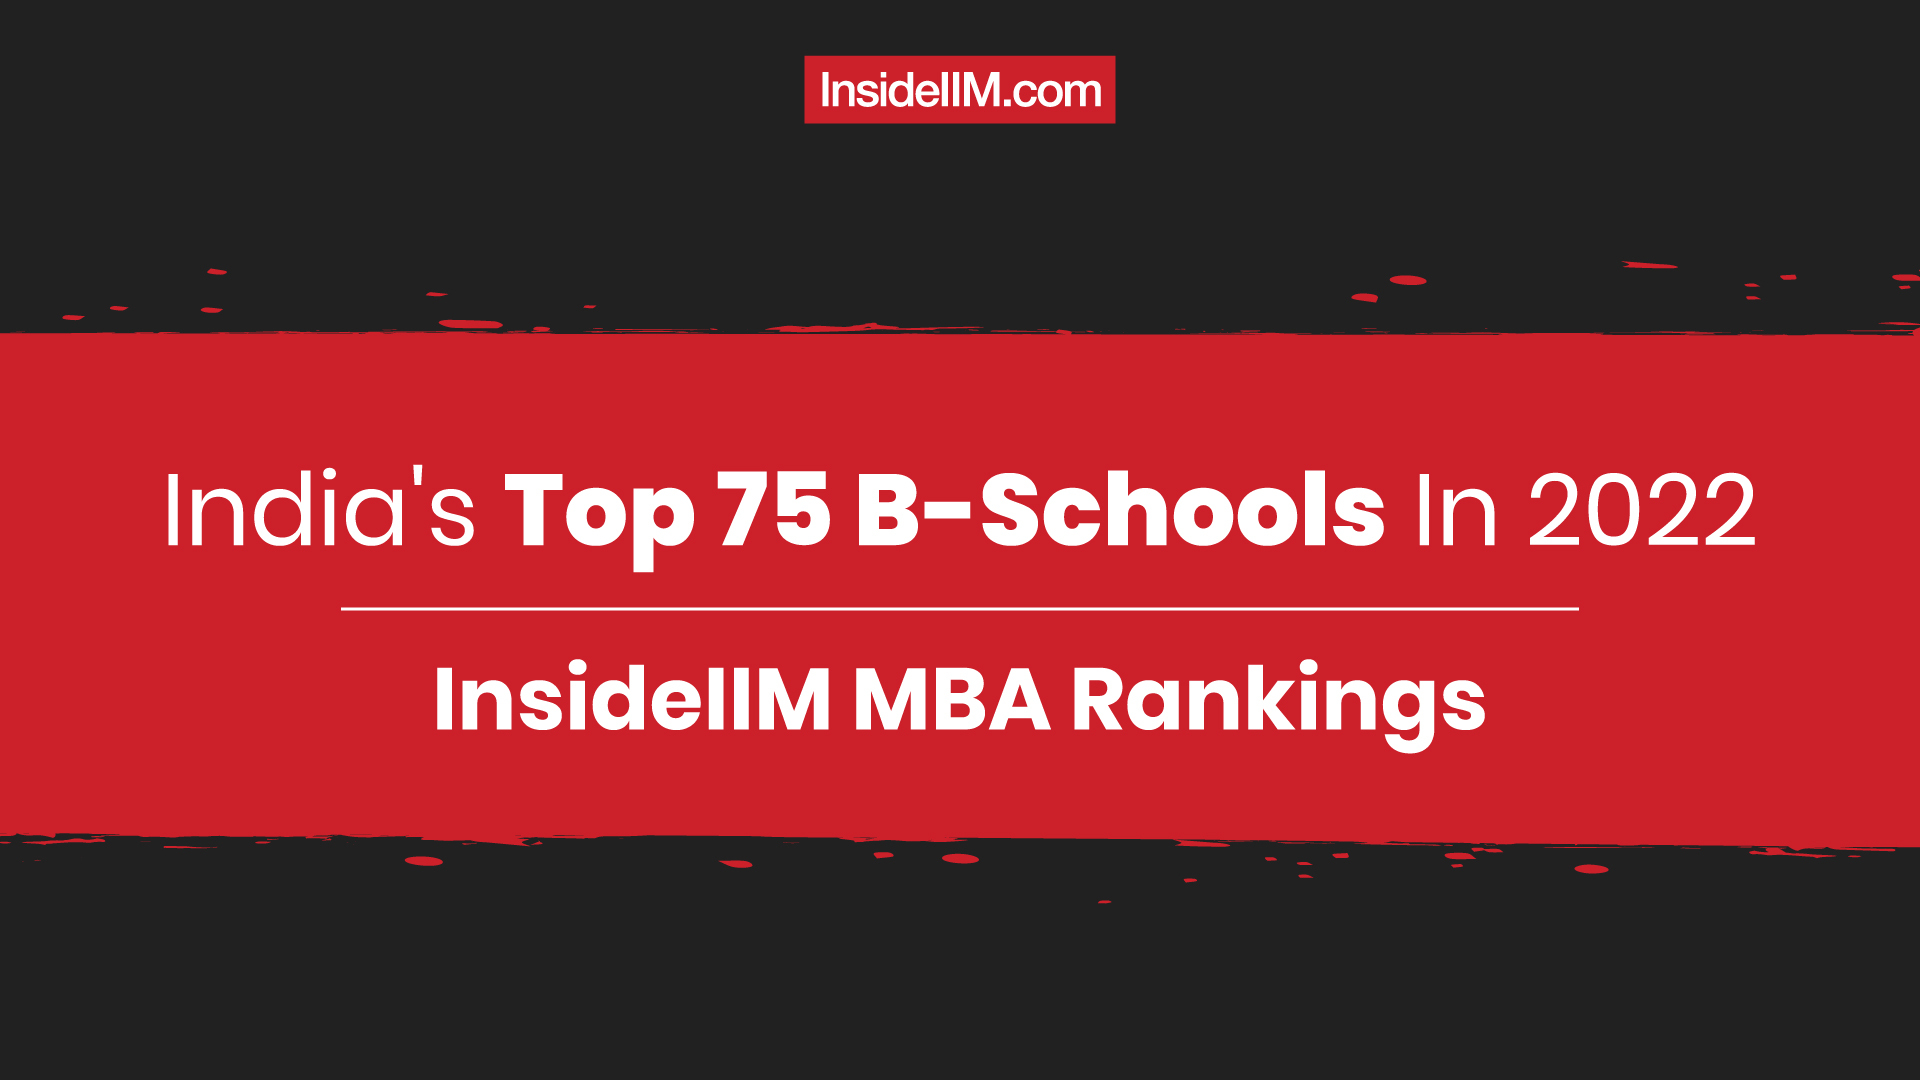 Top MBA Colleges in India in 2022 - IIM Ahmedabad Is India's Best MBA College